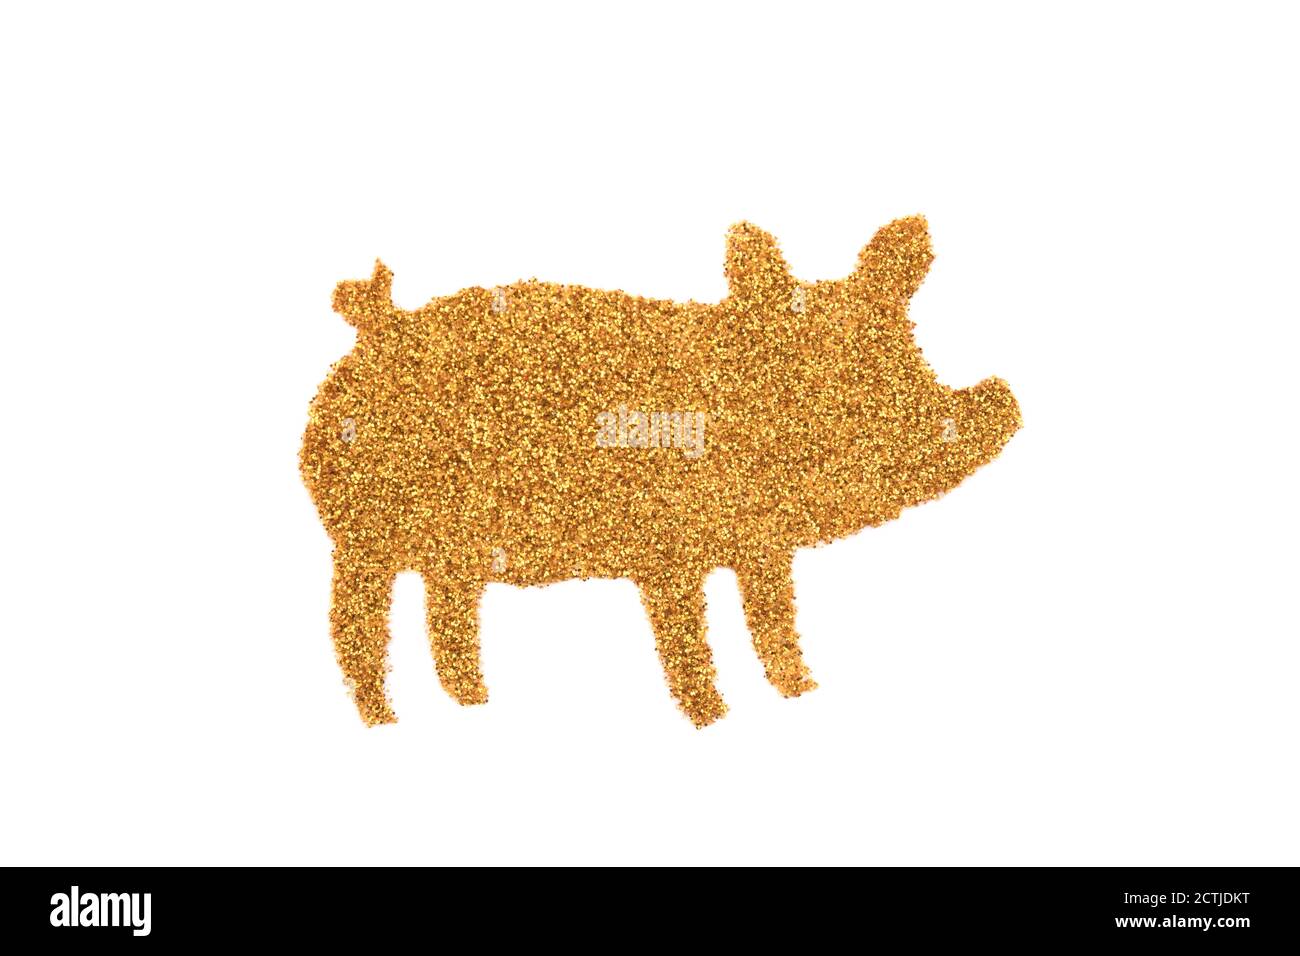 Gold Pig Images – Browse 47 Stock Photos, Vectors, and Video